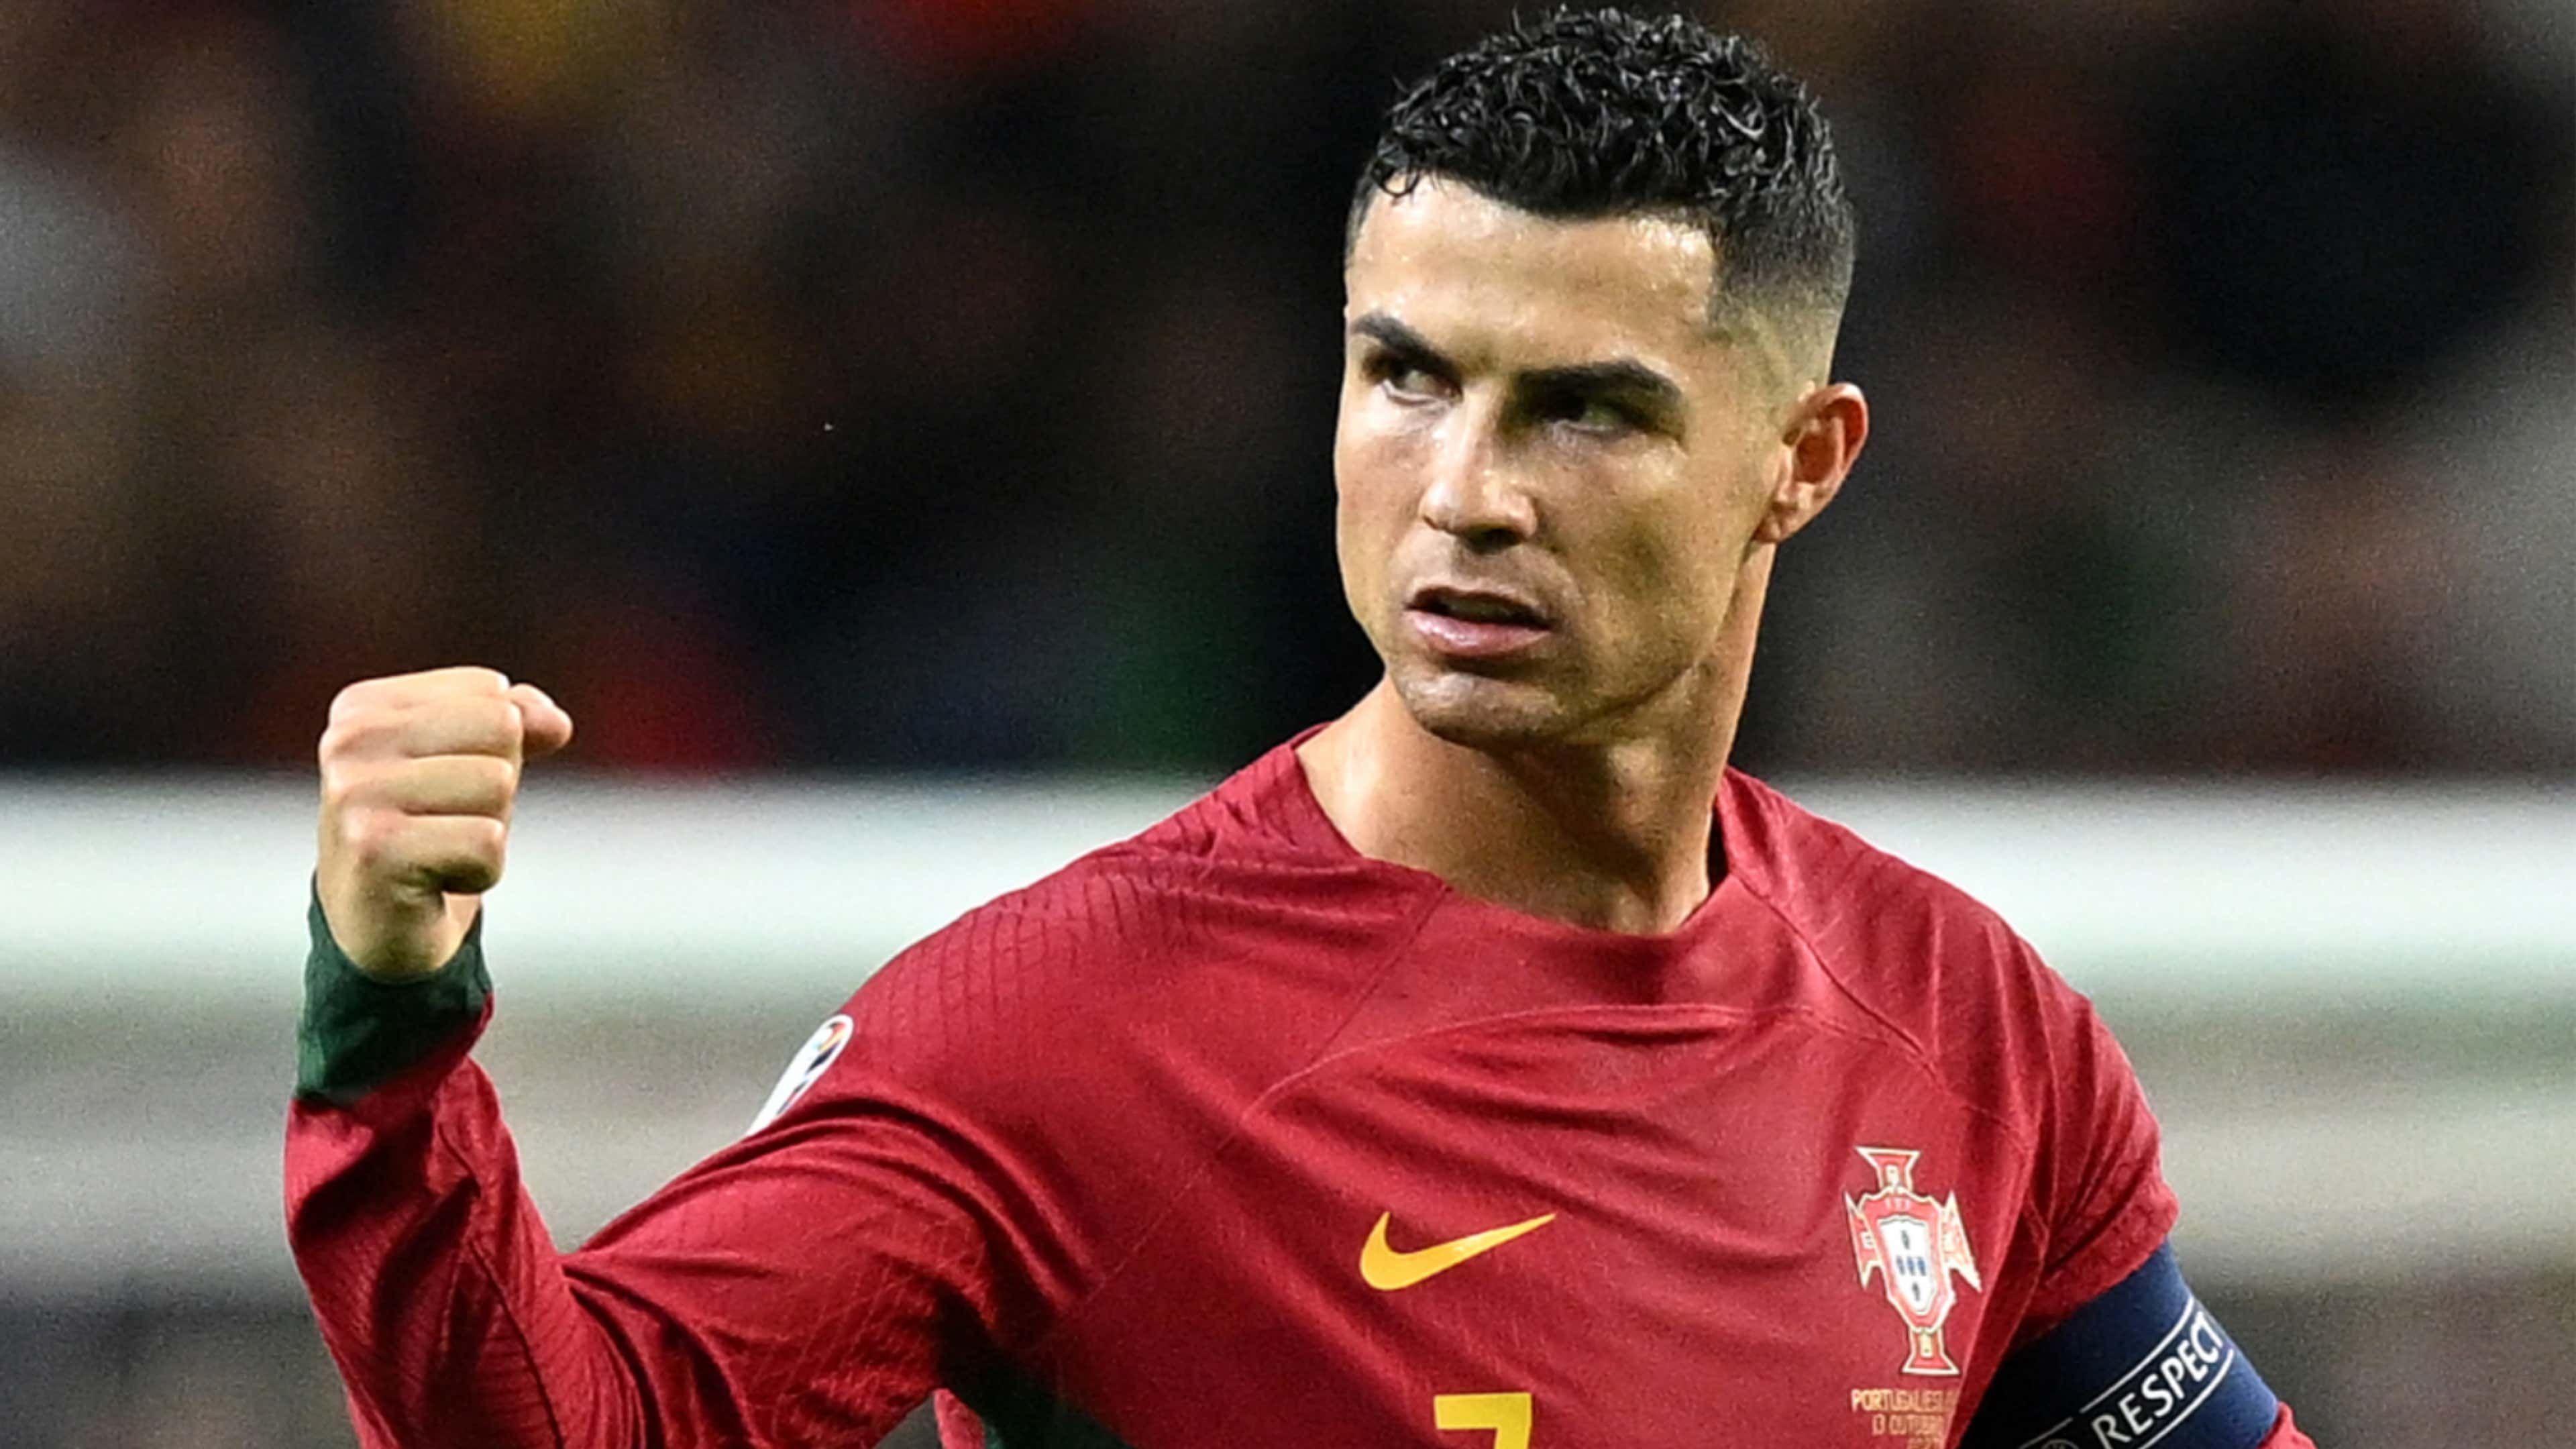 Still going strong' – No stopping Cristiano Ronaldo as he reaches 127  international goals in another emphatic win for Portugal